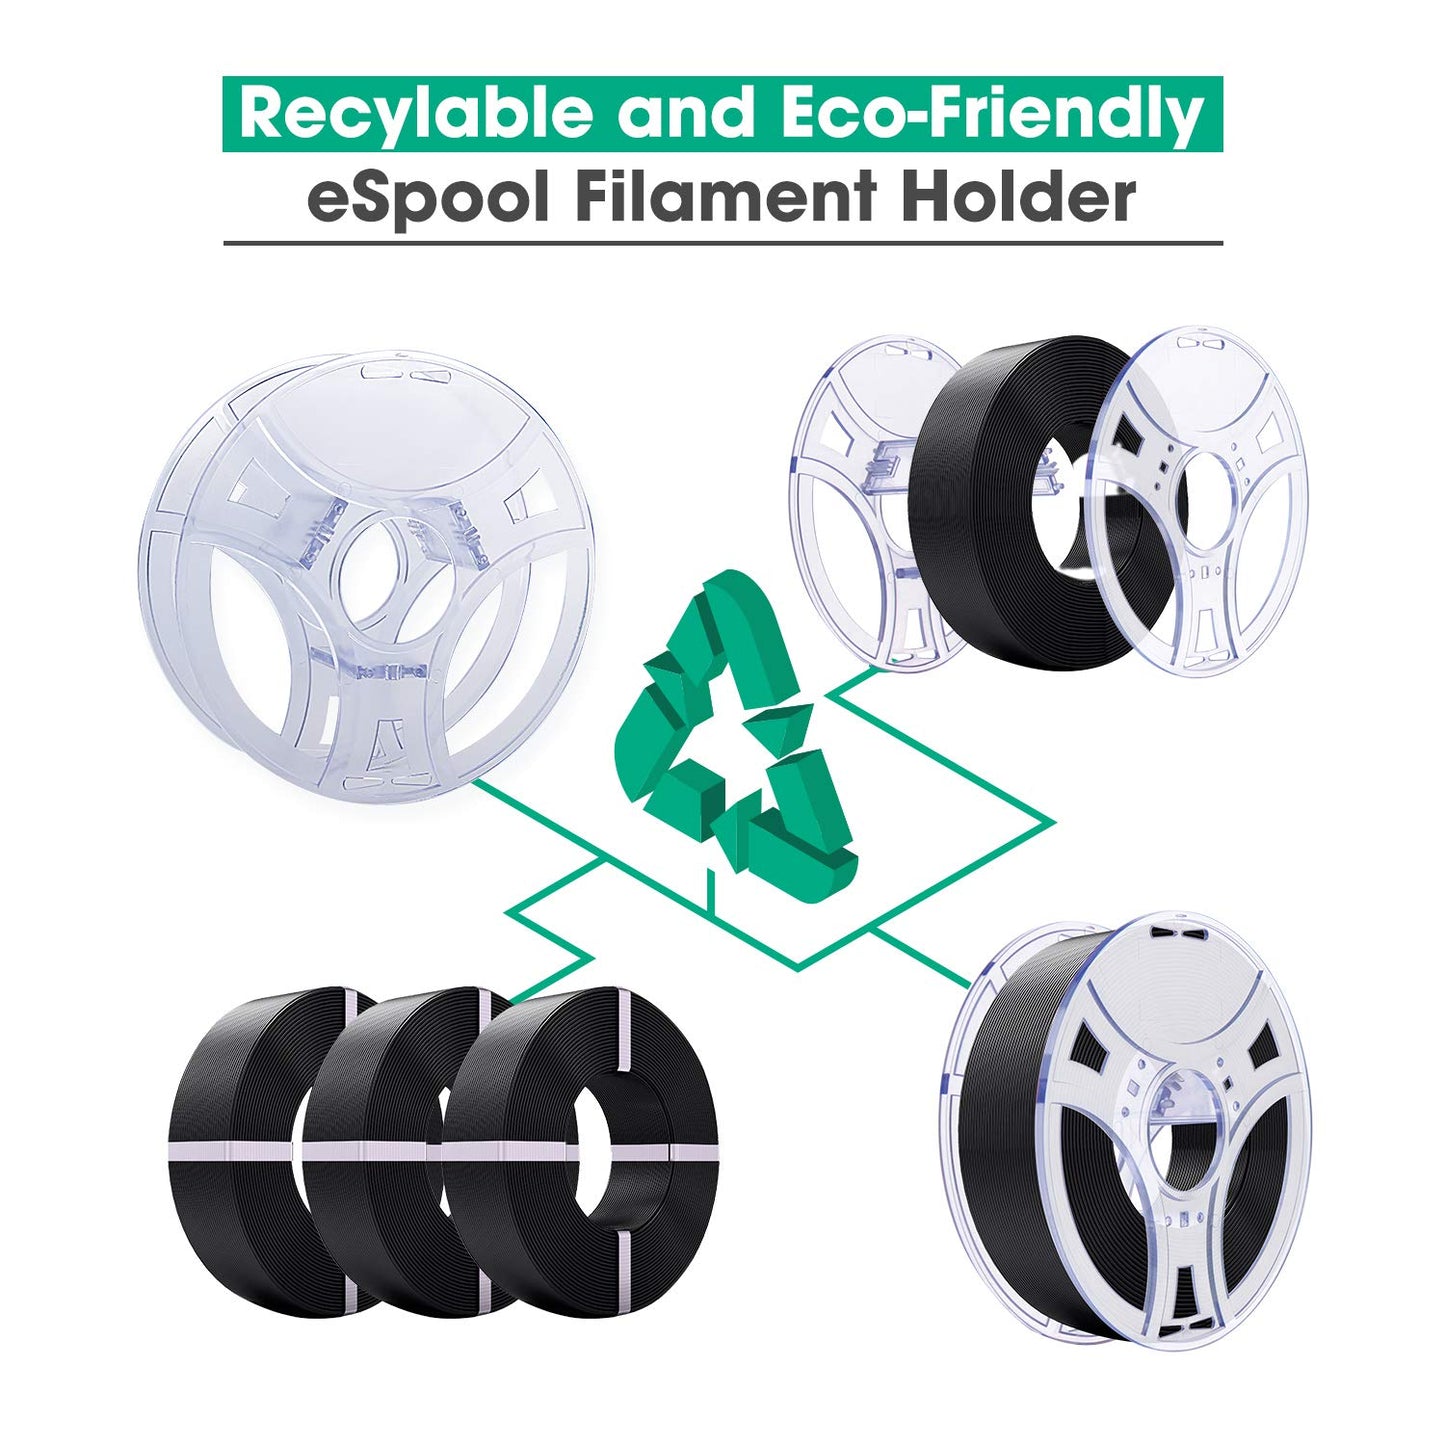 eSUN eSpool Detachable Refilament Reel, PC Hollow Recyclable Filament Holder, Easy Setup Environment-Friendly Replacement Storage Spool, 2 Pack, 200x65mm